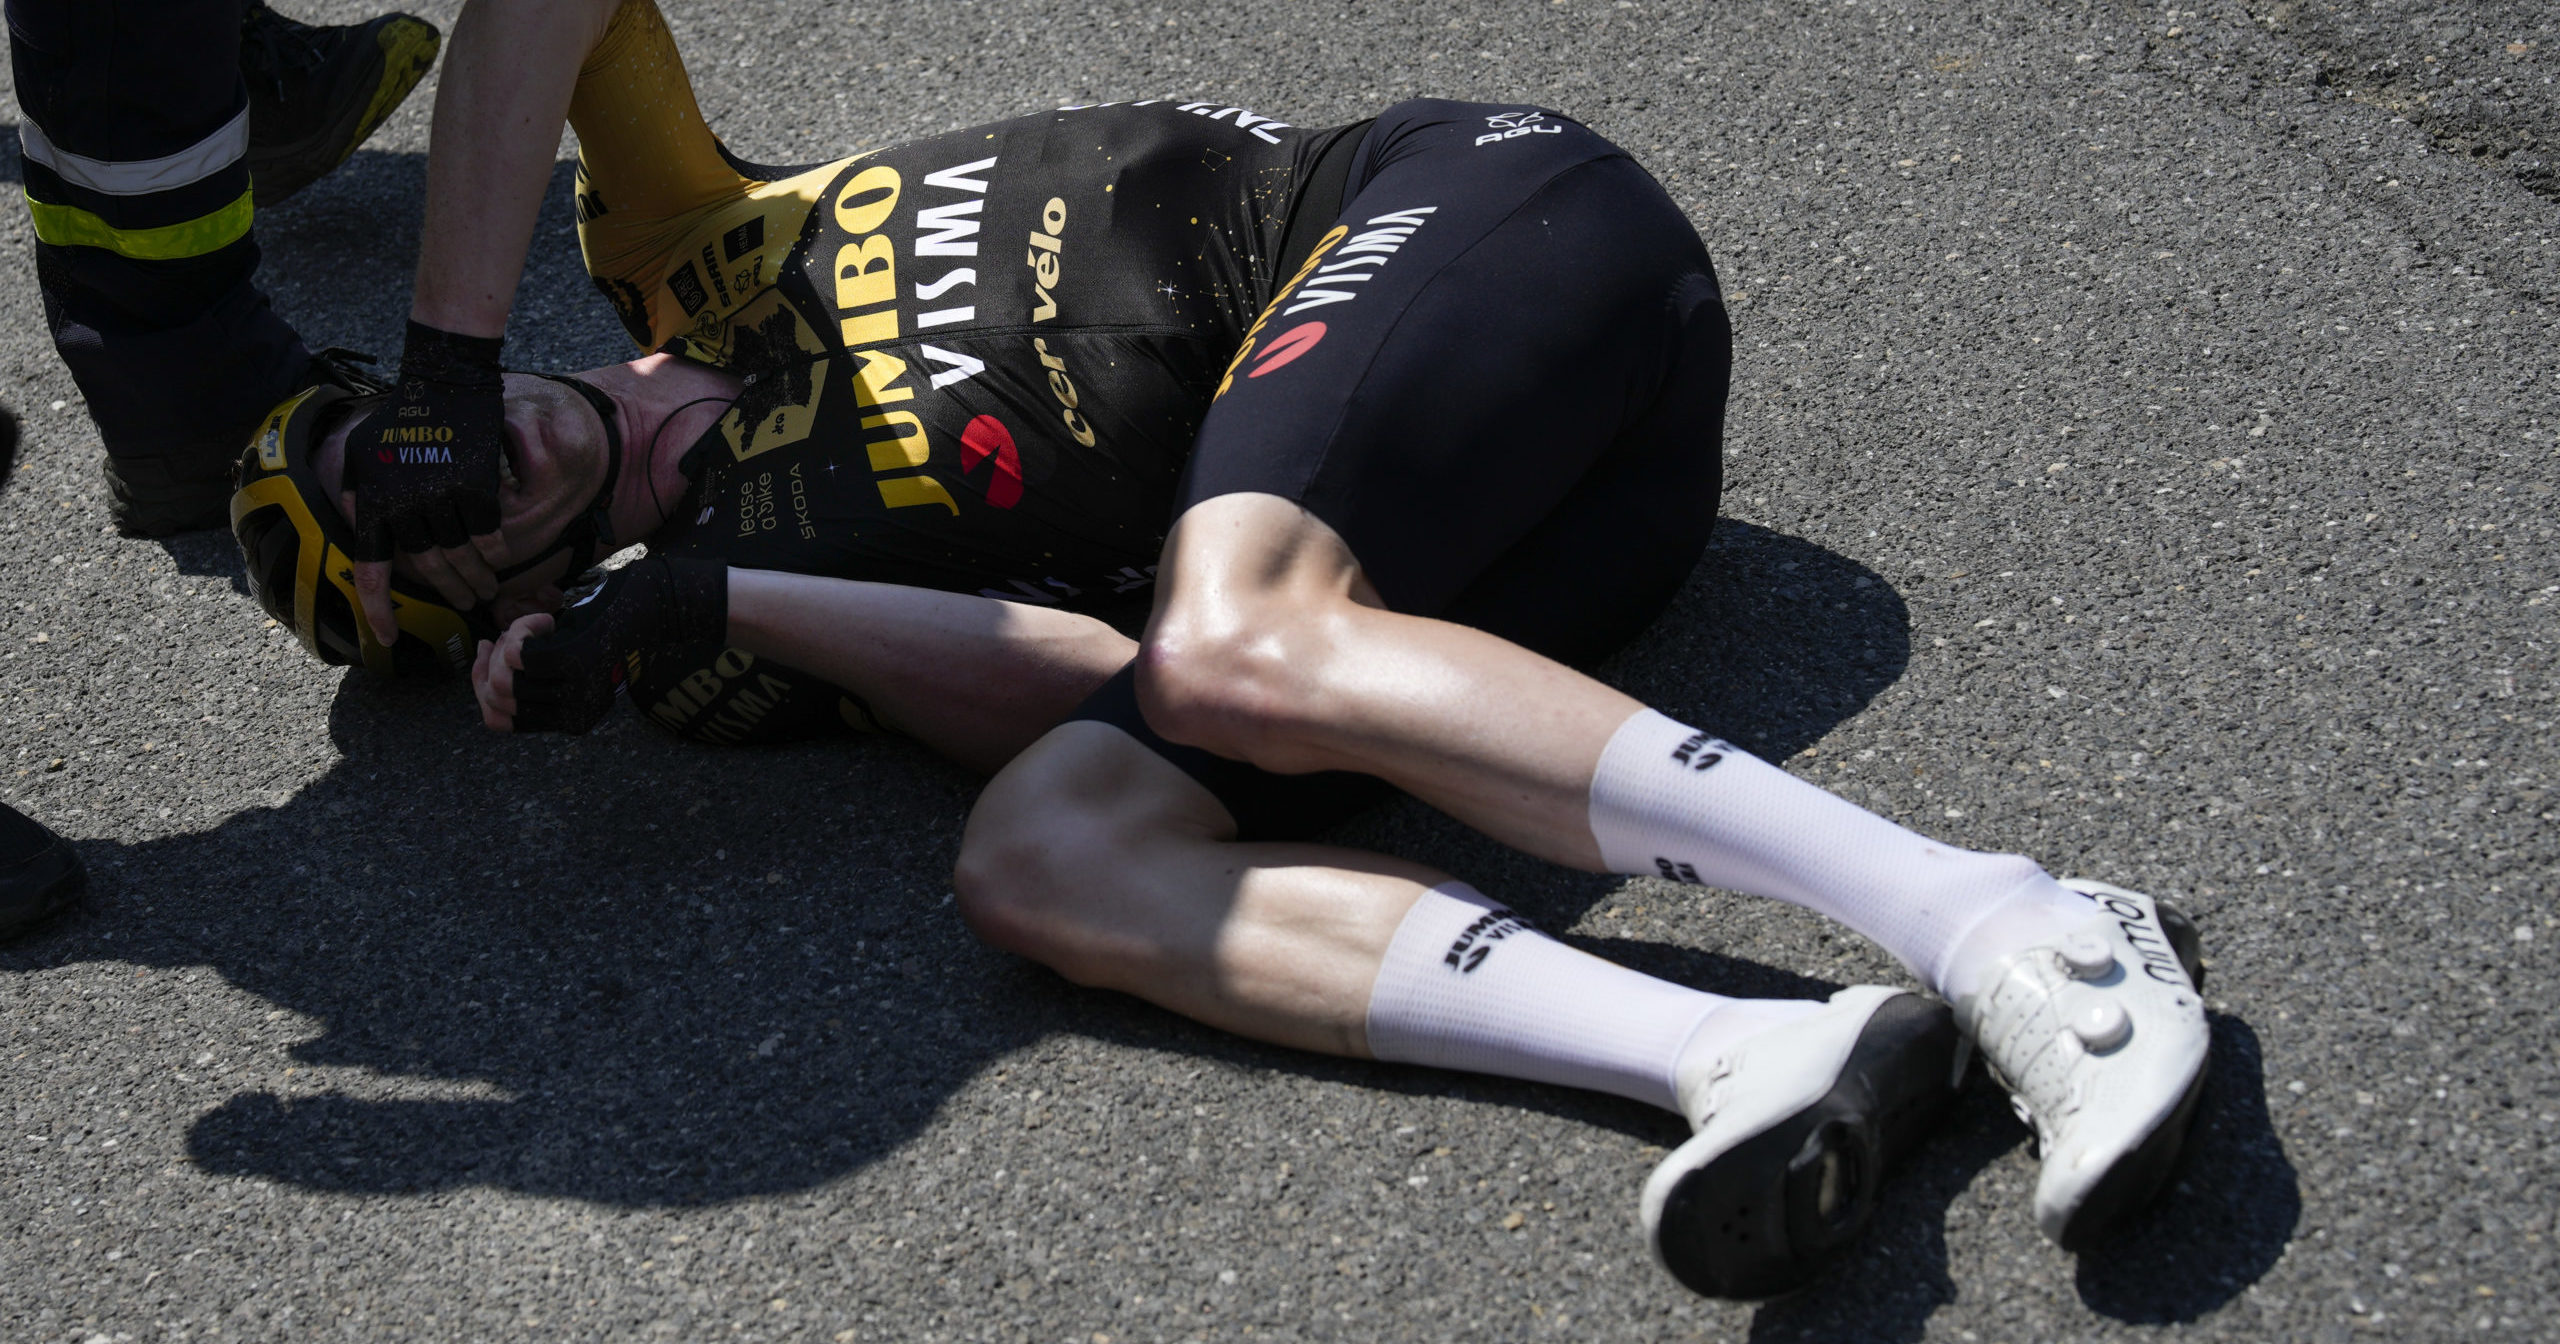 Belgium's Nathan van Hooydonck lies on the ground after a crash during the 15th stage of the Tour de France cycling race on Sunday.